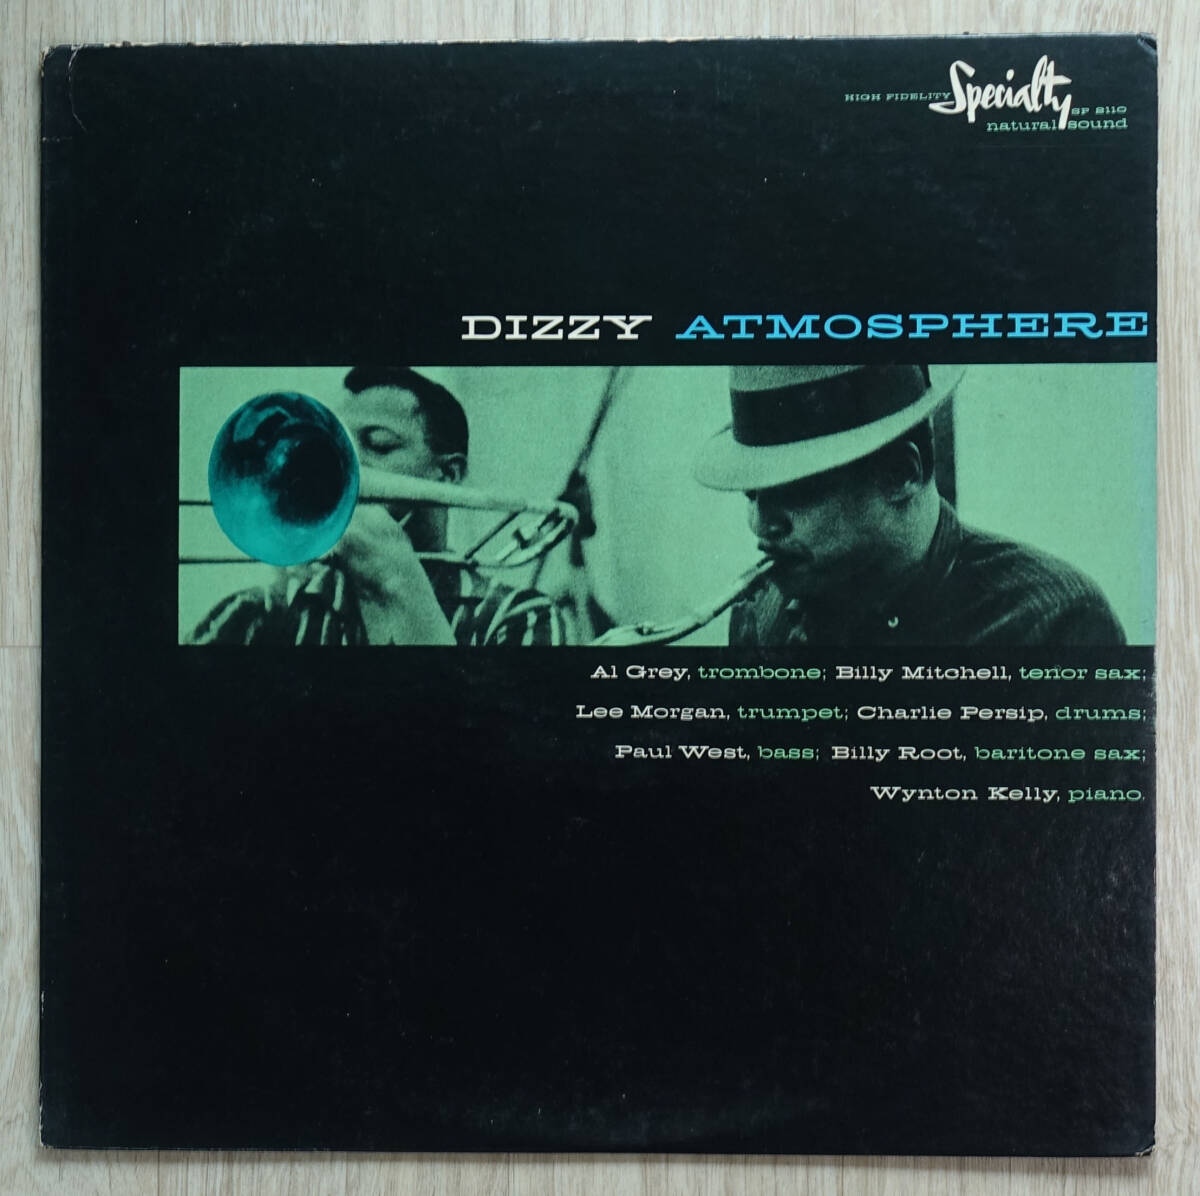  ultimate beautiful! US Specialty 2110 complete original Dizzy Atmosphere / Lee Morgan other DG lable 